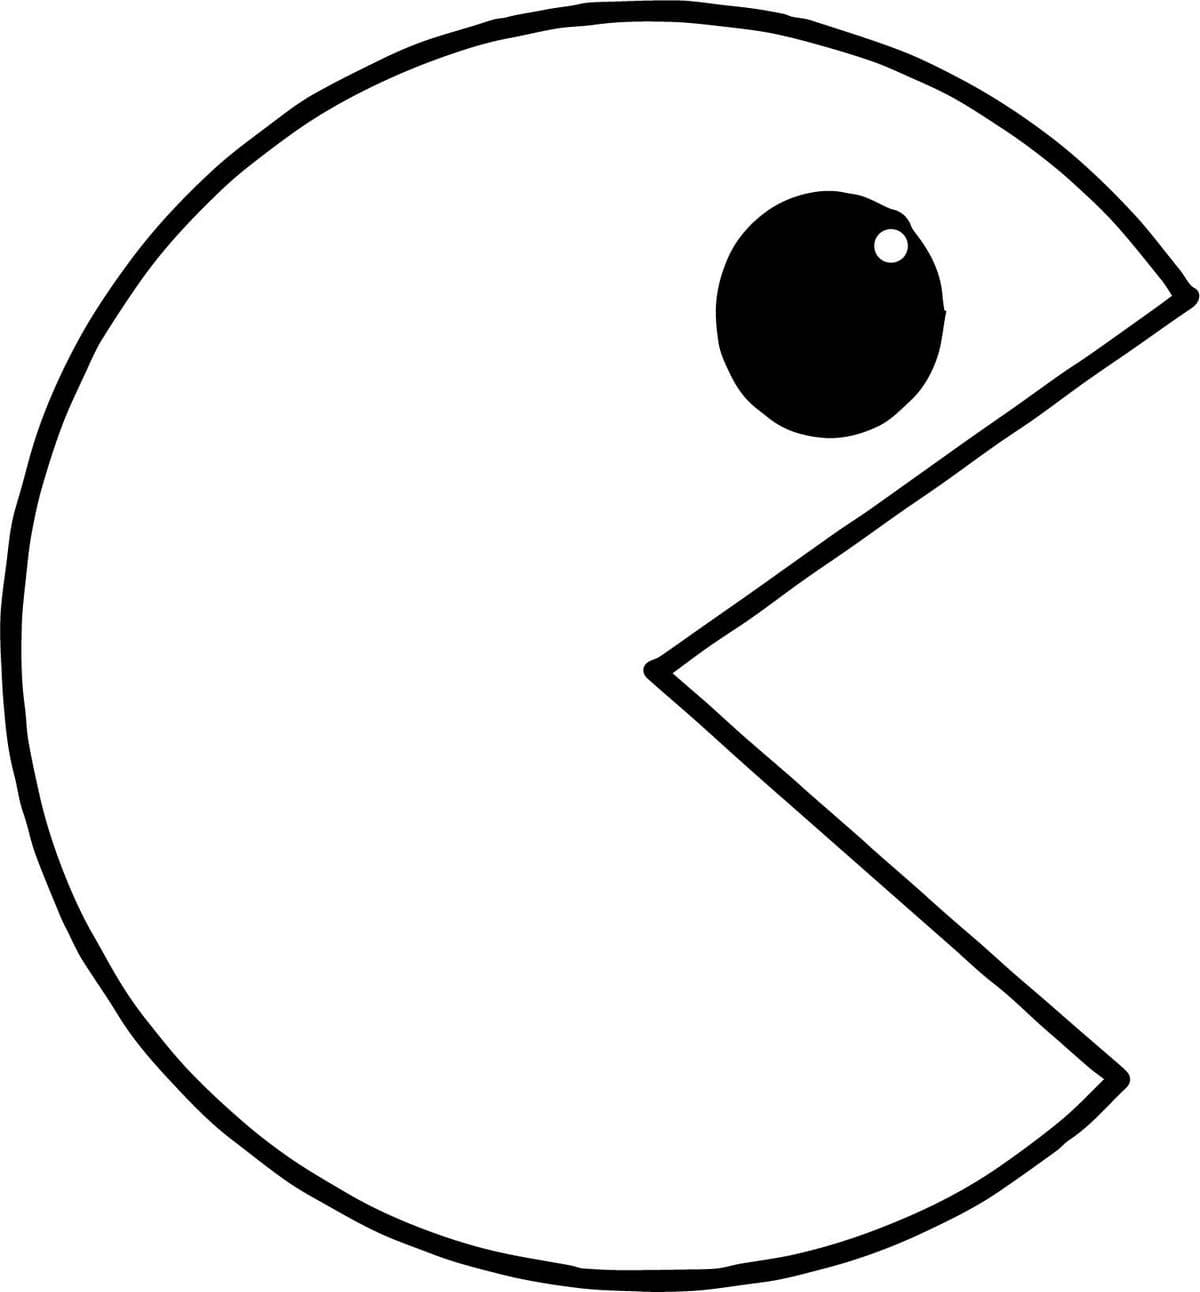 Pacman Coloring Pages. 